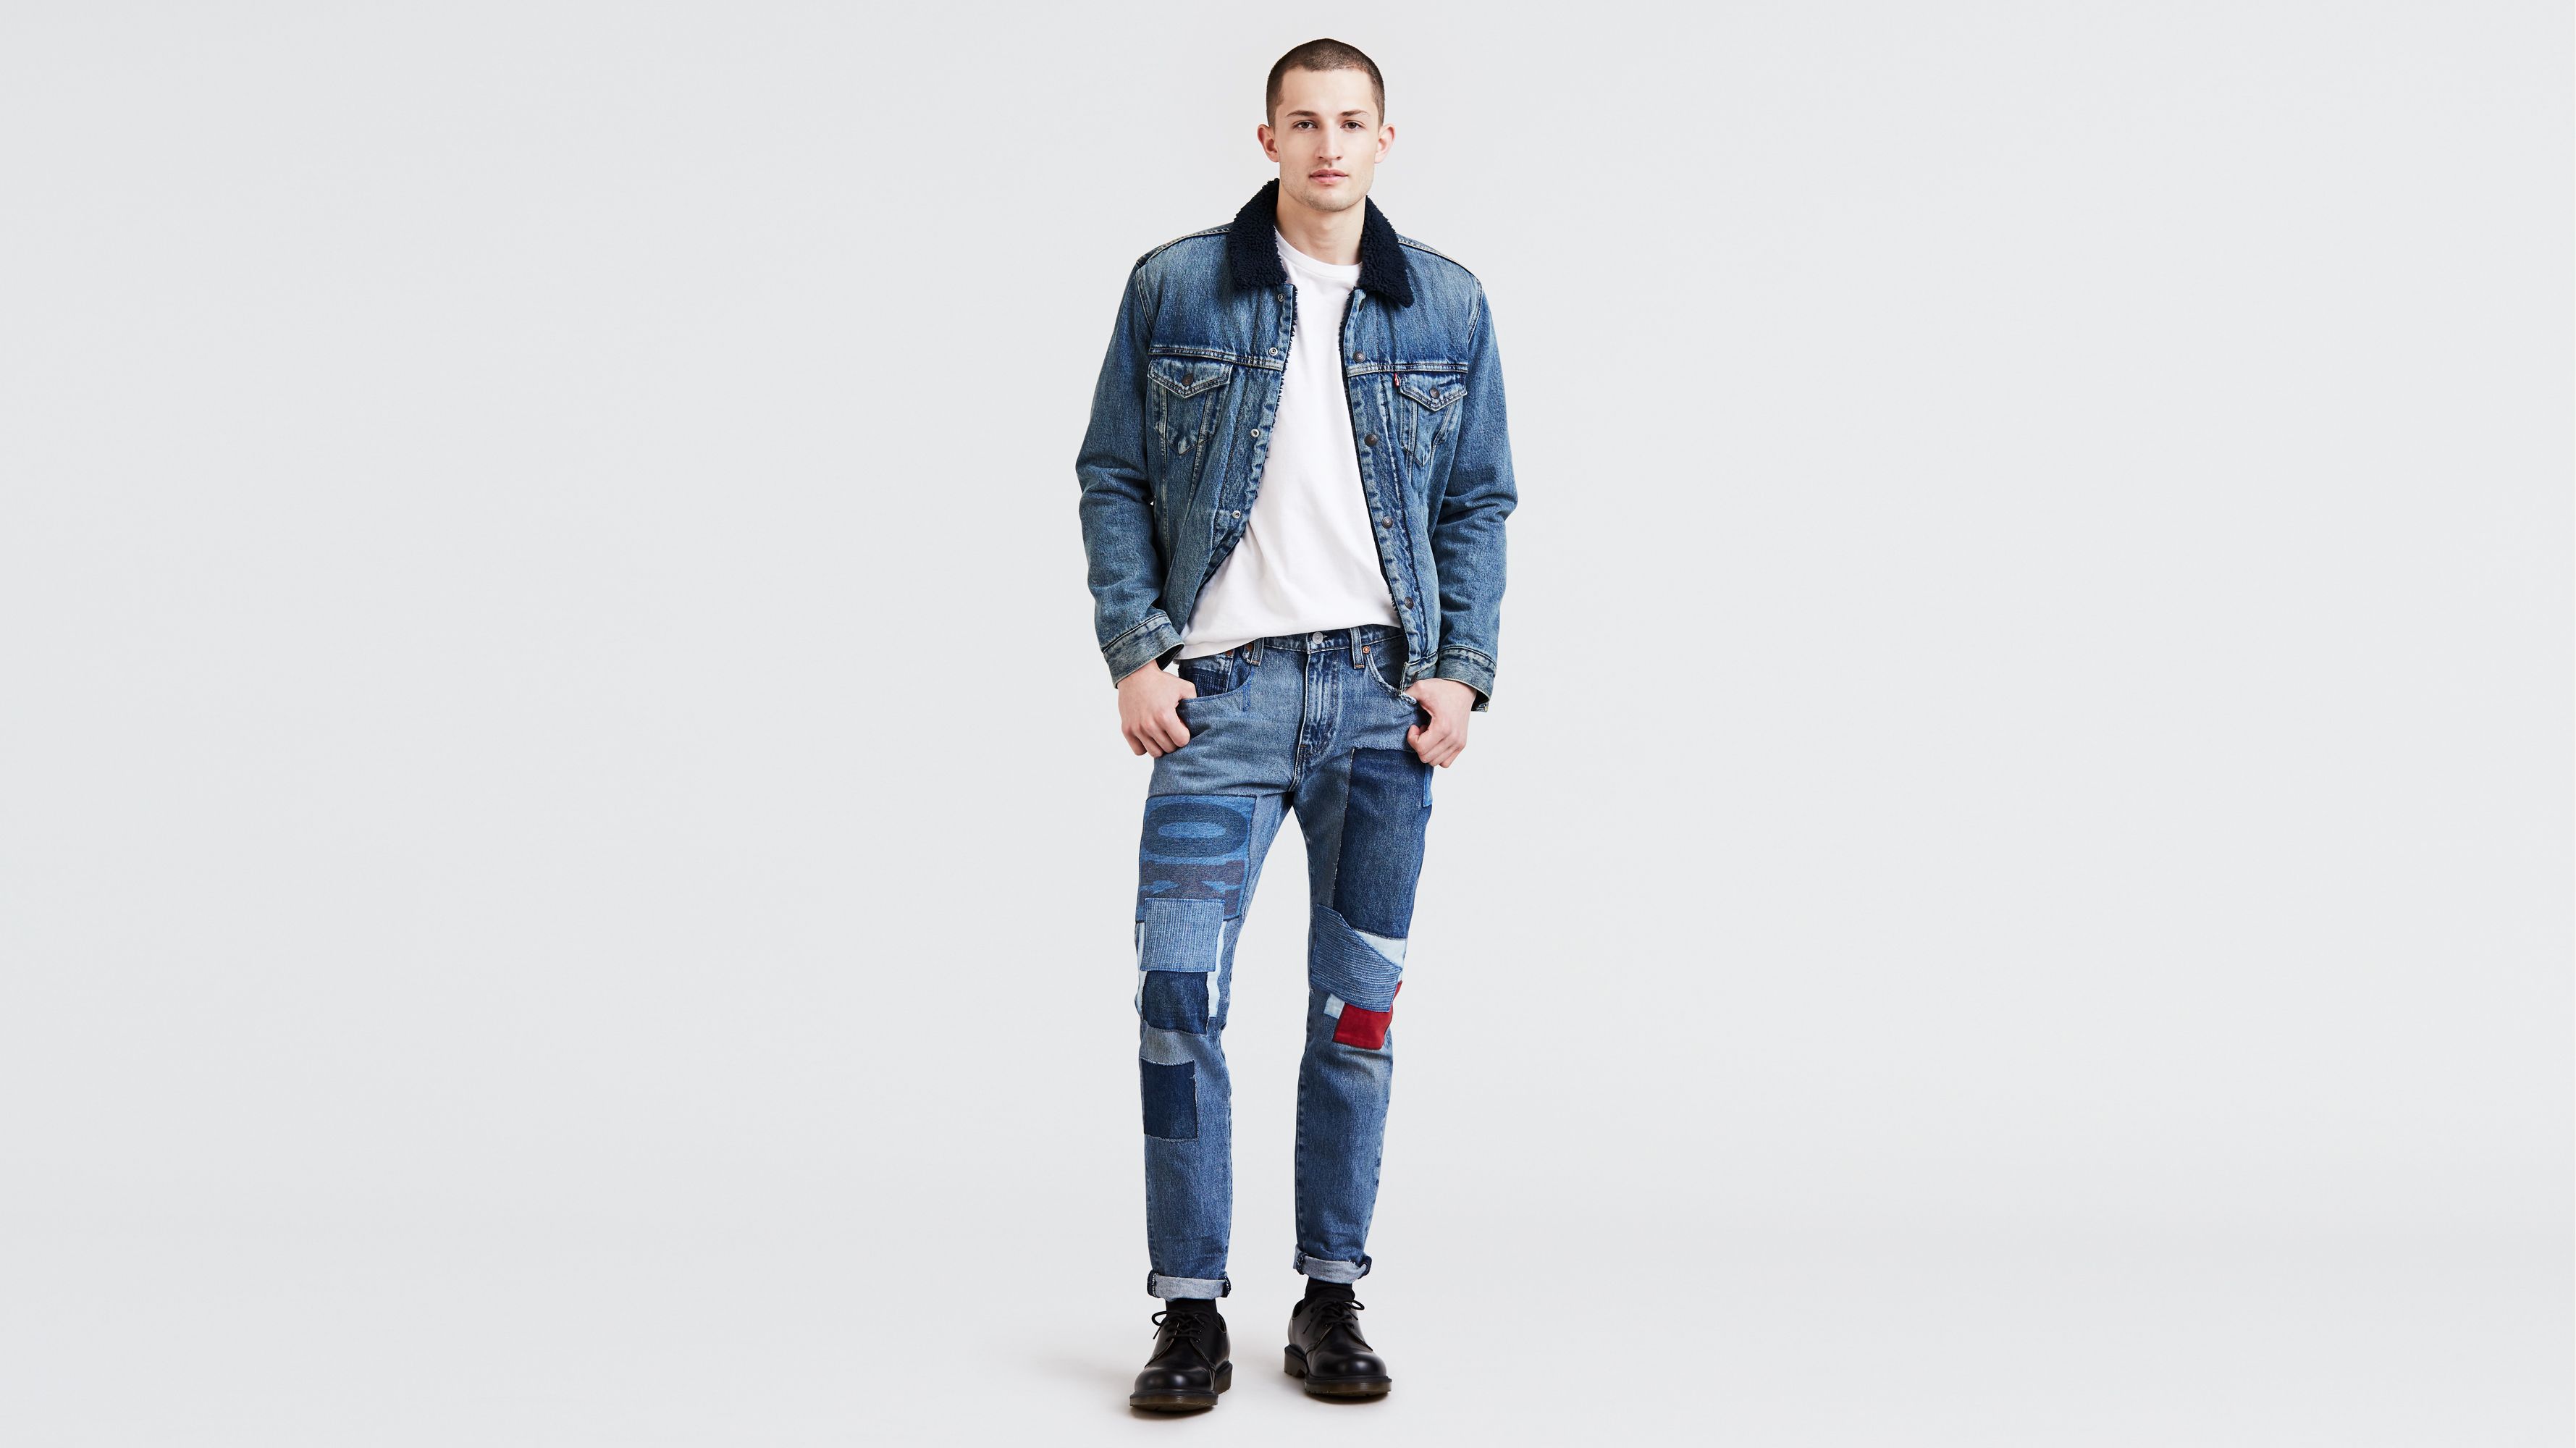 levis 510 cleaner